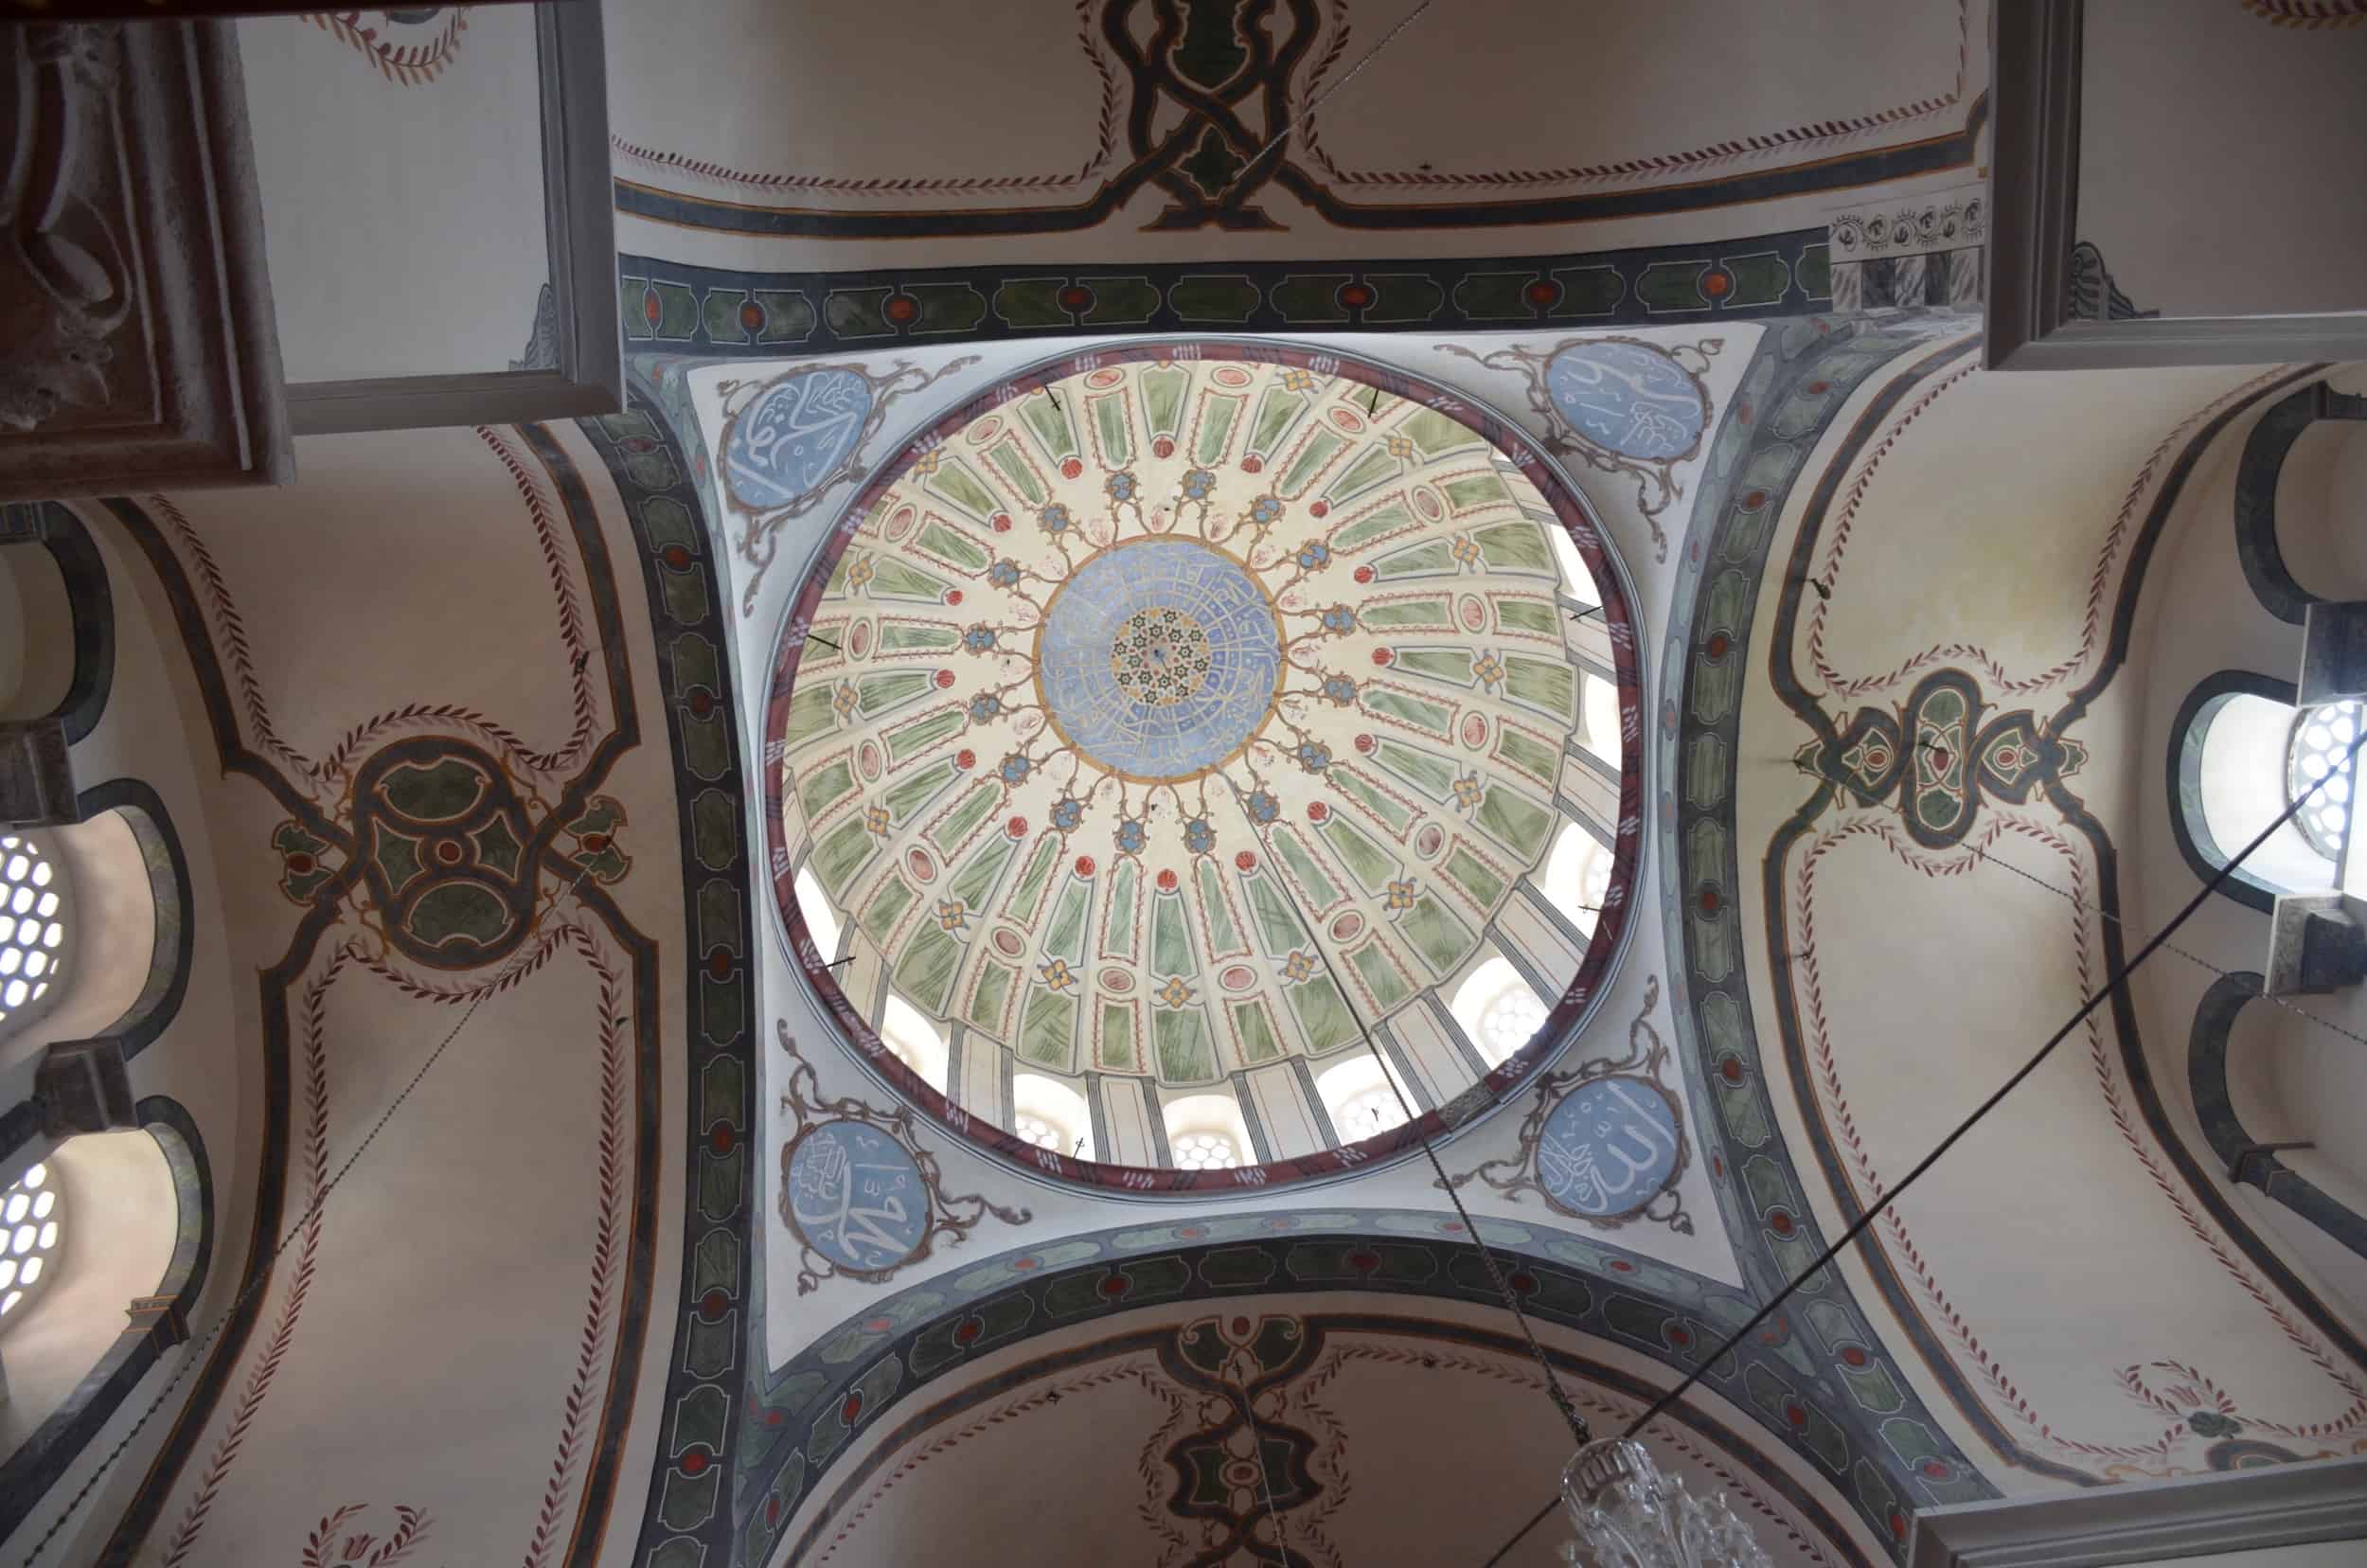 Dome of the south church of the Zeyrek Mosque in Zeyrek, Istanbul, Turkey